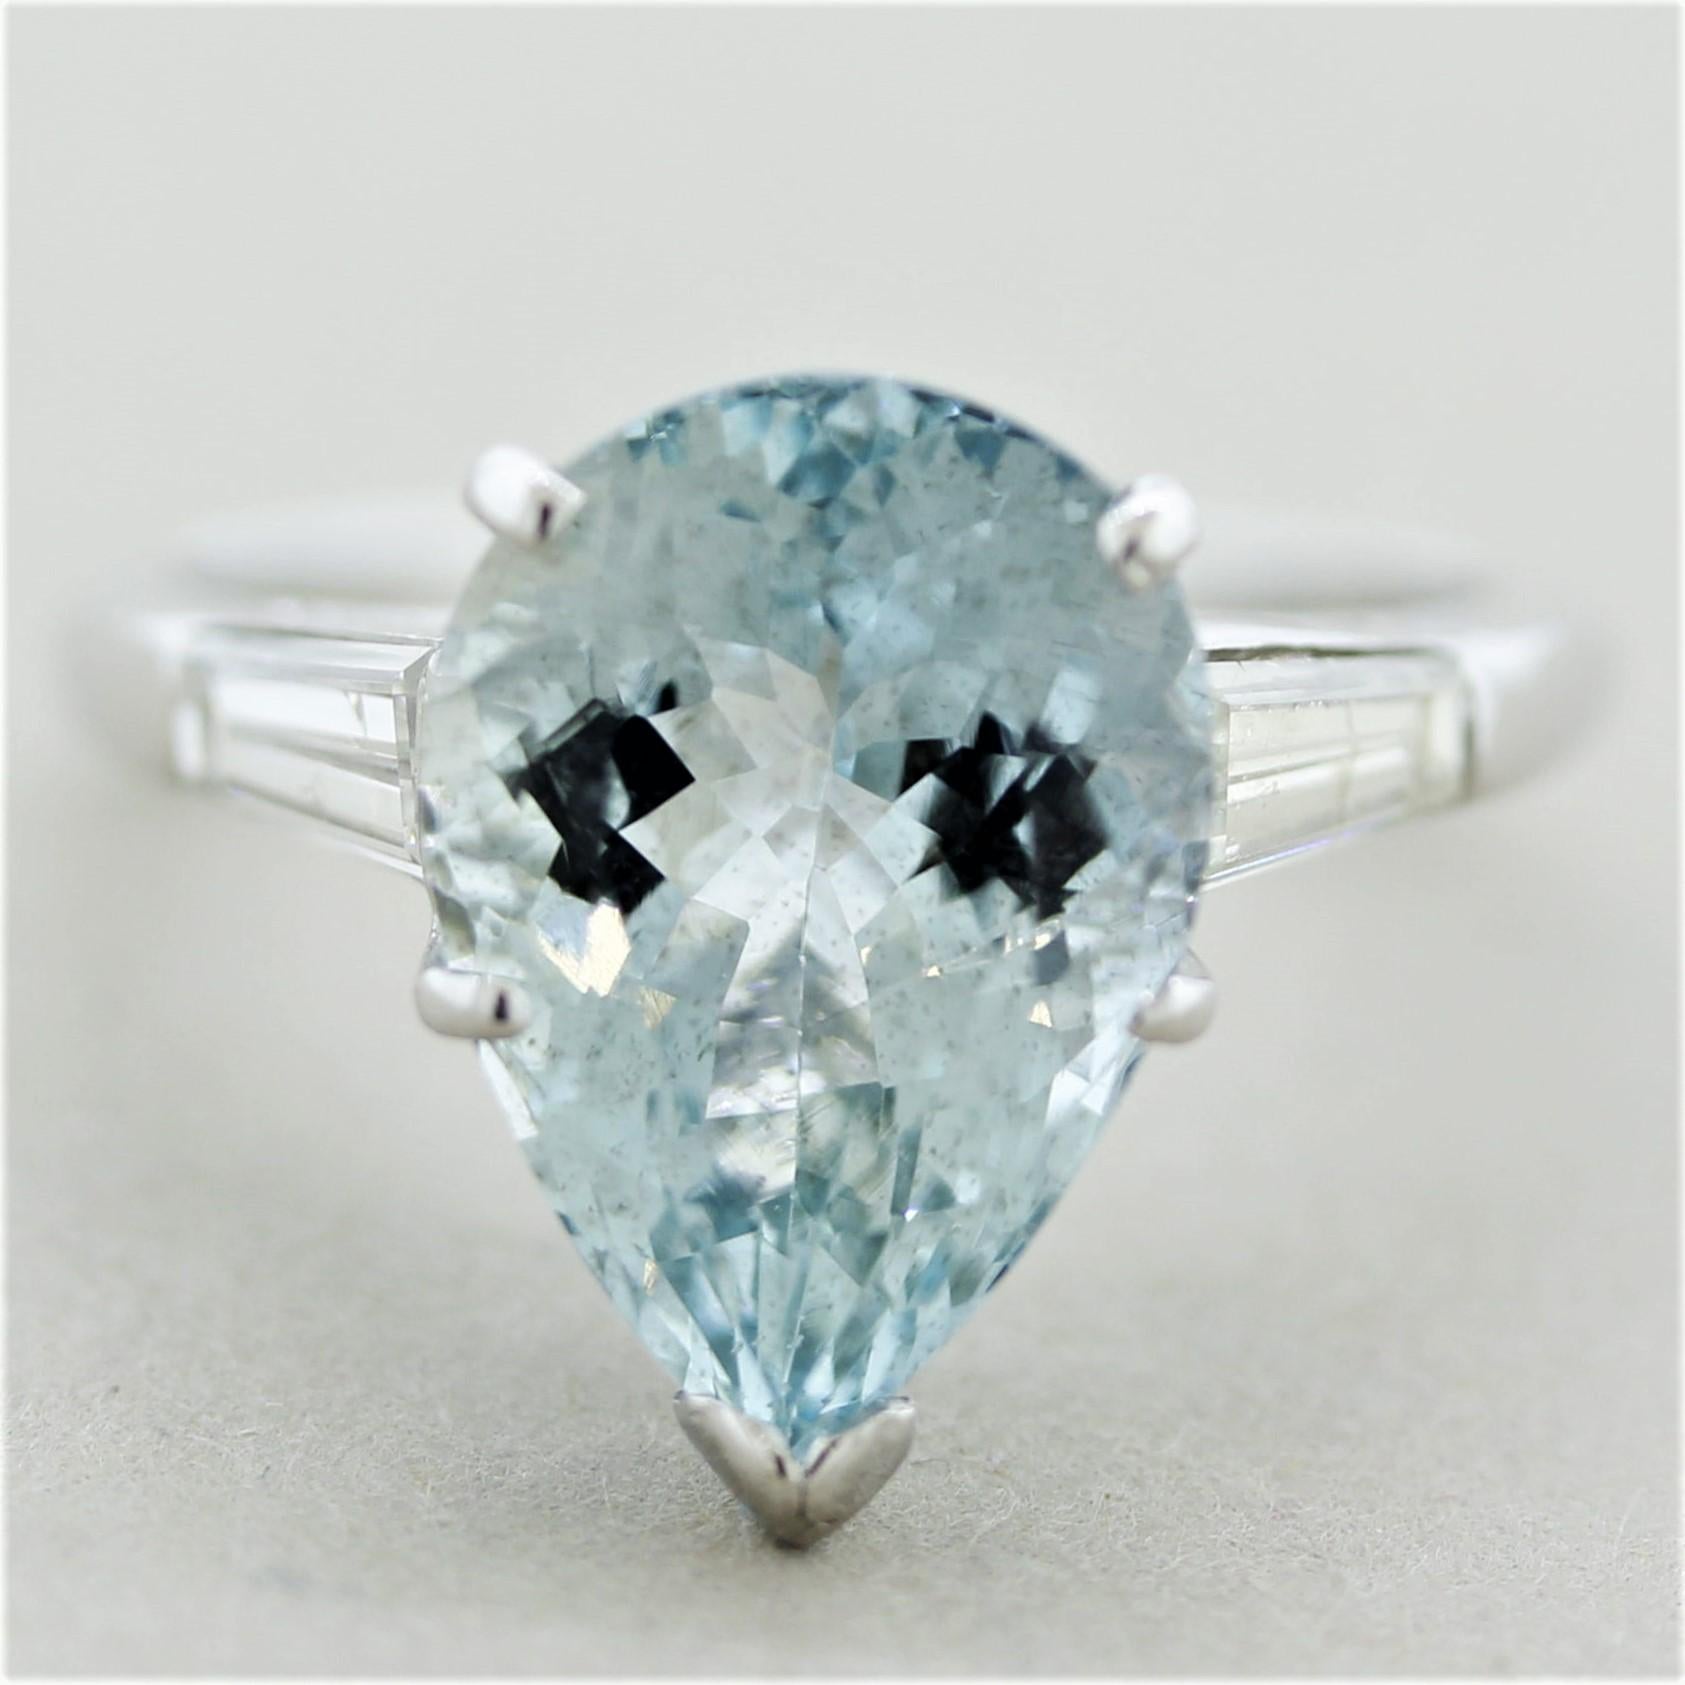 A classic 3-stone ring featuring a 5.46 carat pear-shape aquamarine. It has a lovely bright sea-blue color and is accented by 2 baguette-cut diamonds set on its sides and weighing a total of 0.40 carats. Hand-fabricated in platinum and ready to be